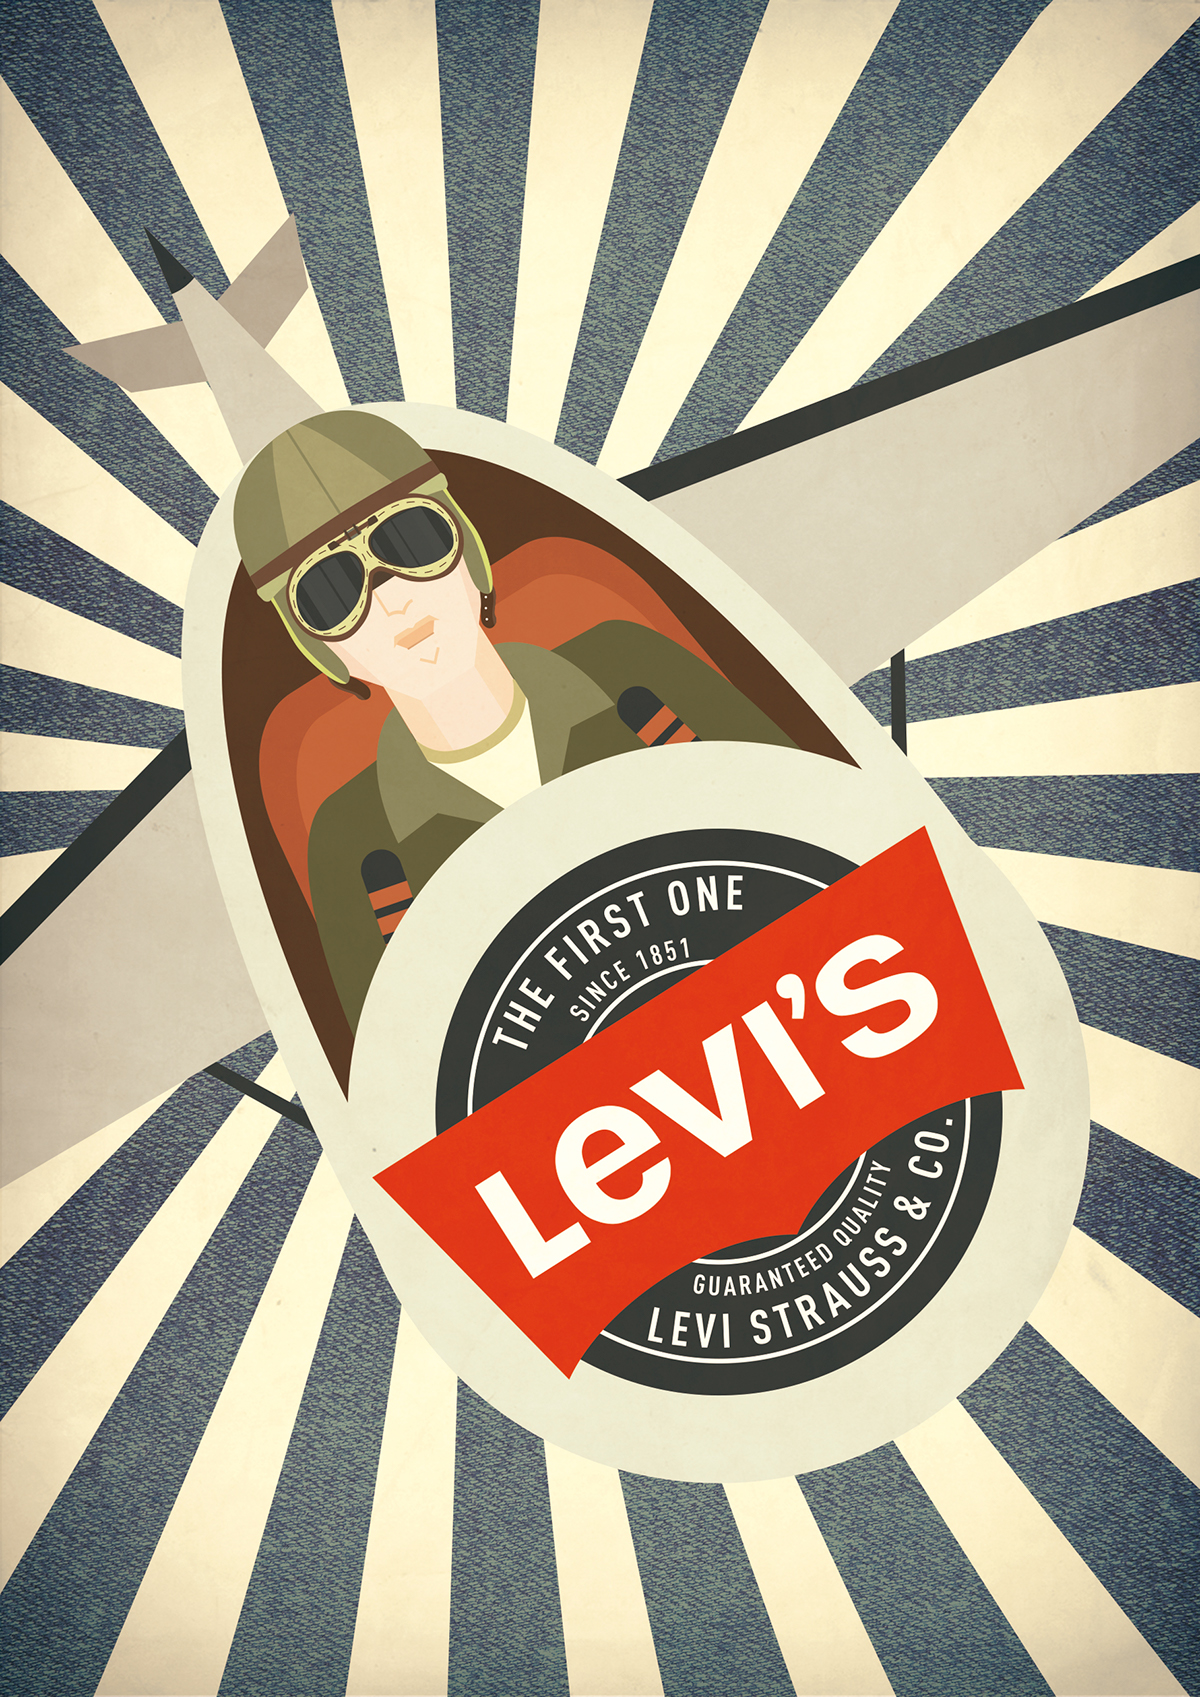 levi´s women bandanna the 40s miner performer famous jeans levis strauss evolution airman Advertising Campaign